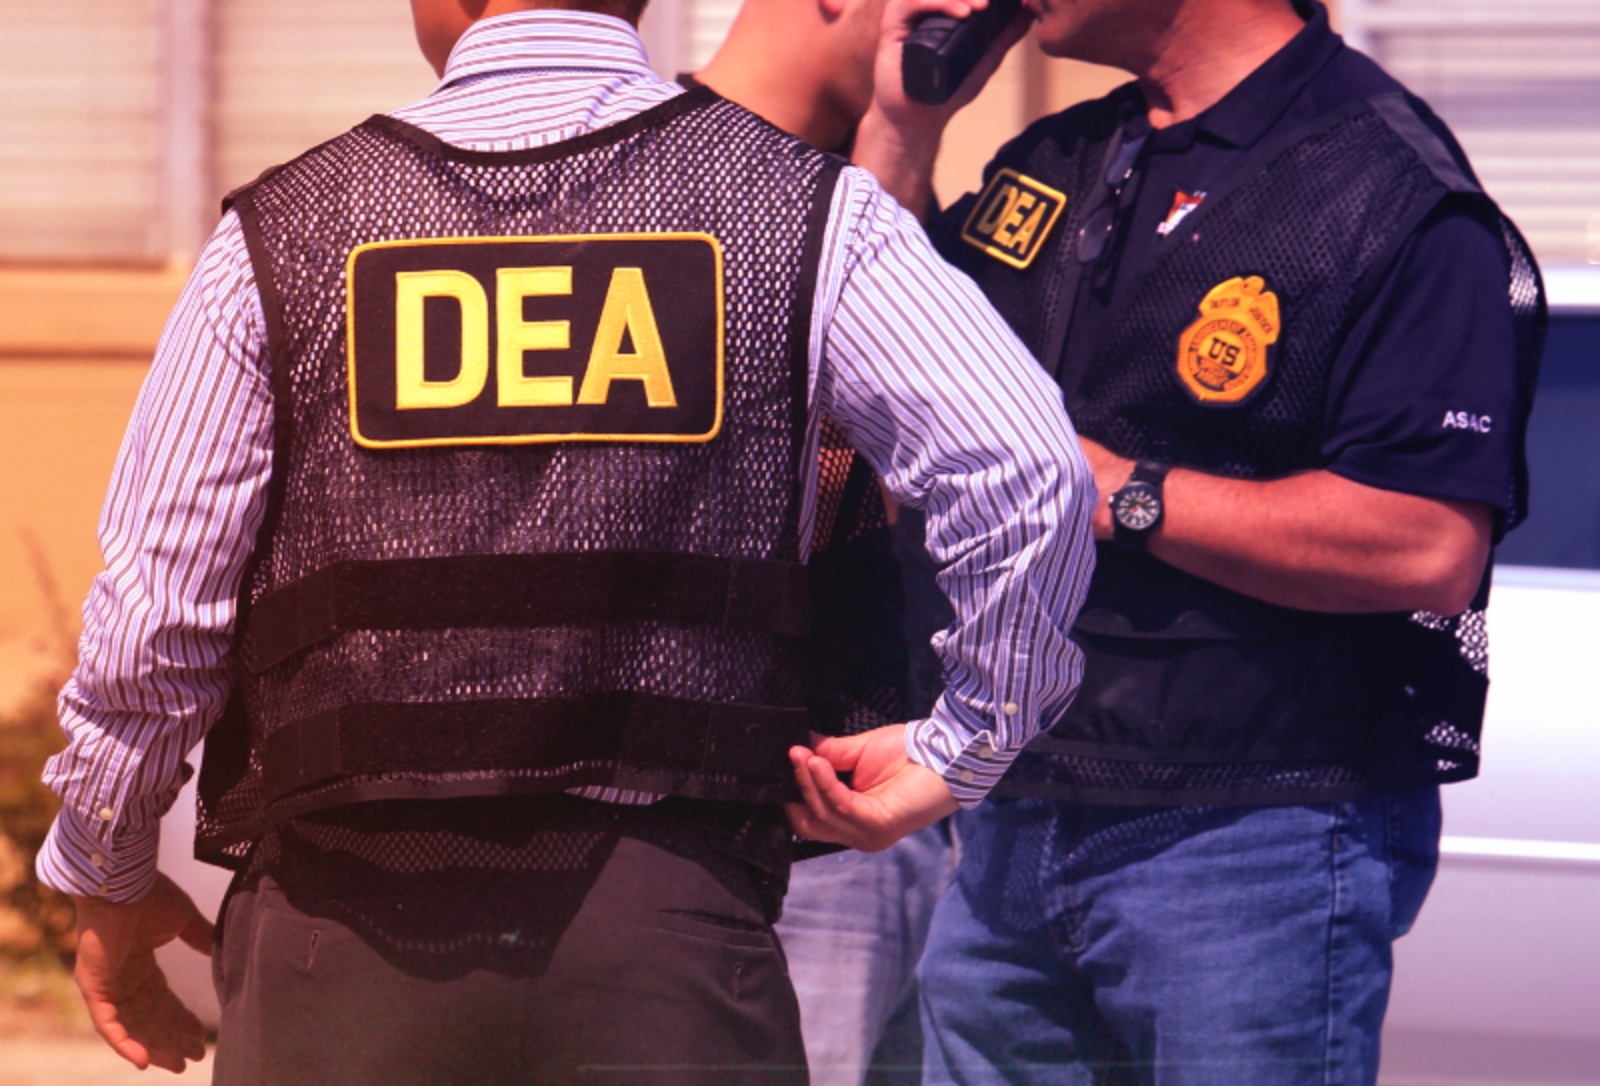 DEA Agent gets a positive THC test result from CBD, sowing confusion